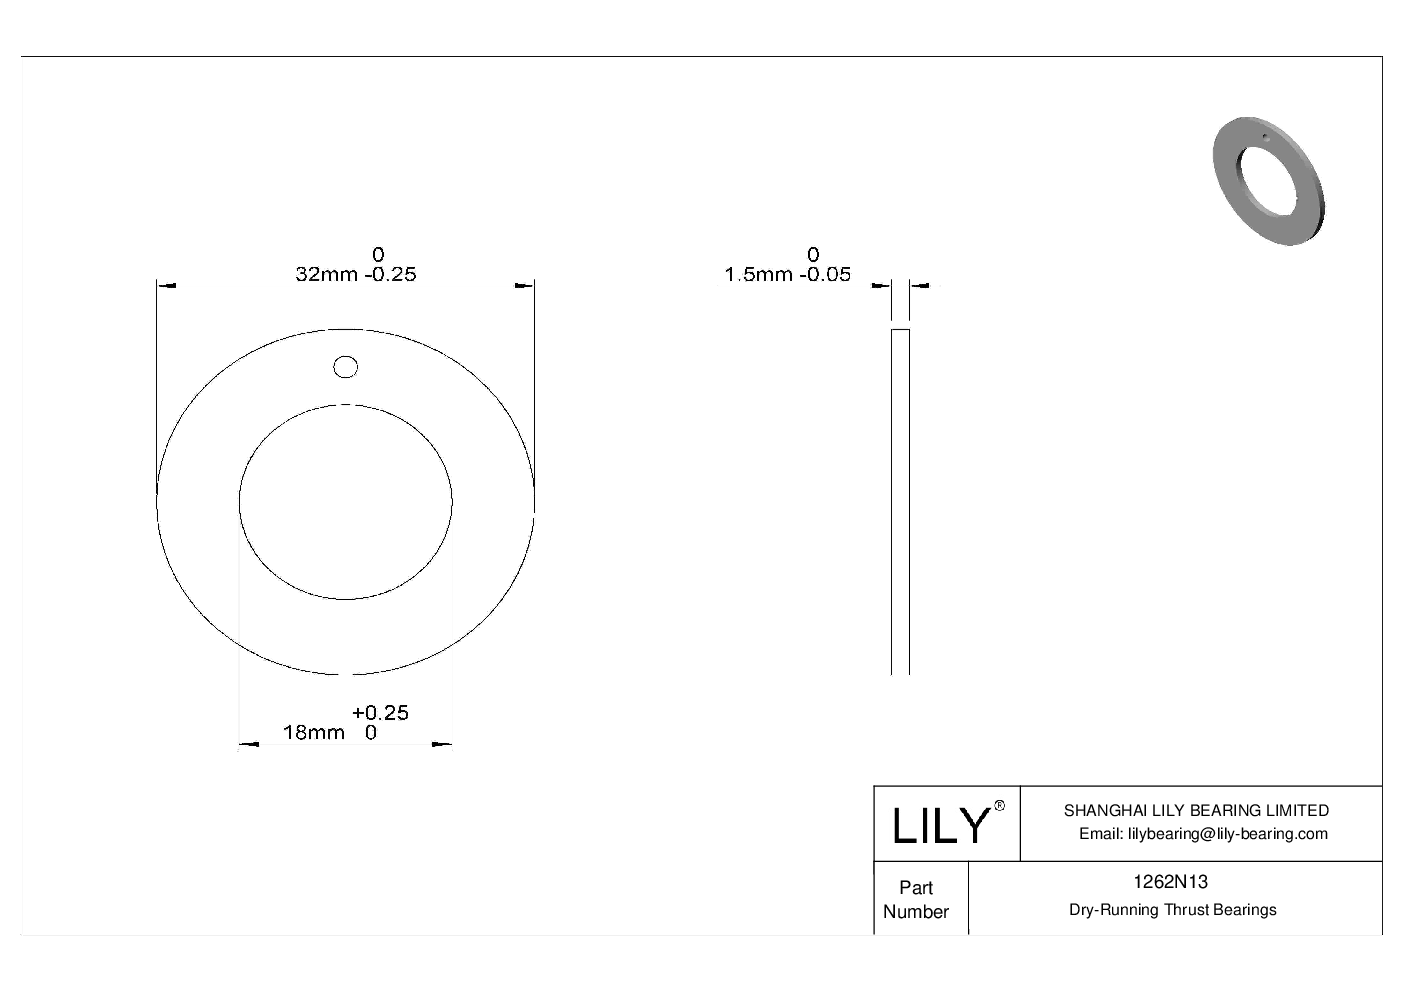 BCGCNBD High-Load Dry-Running Thrust Bearings cad drawing